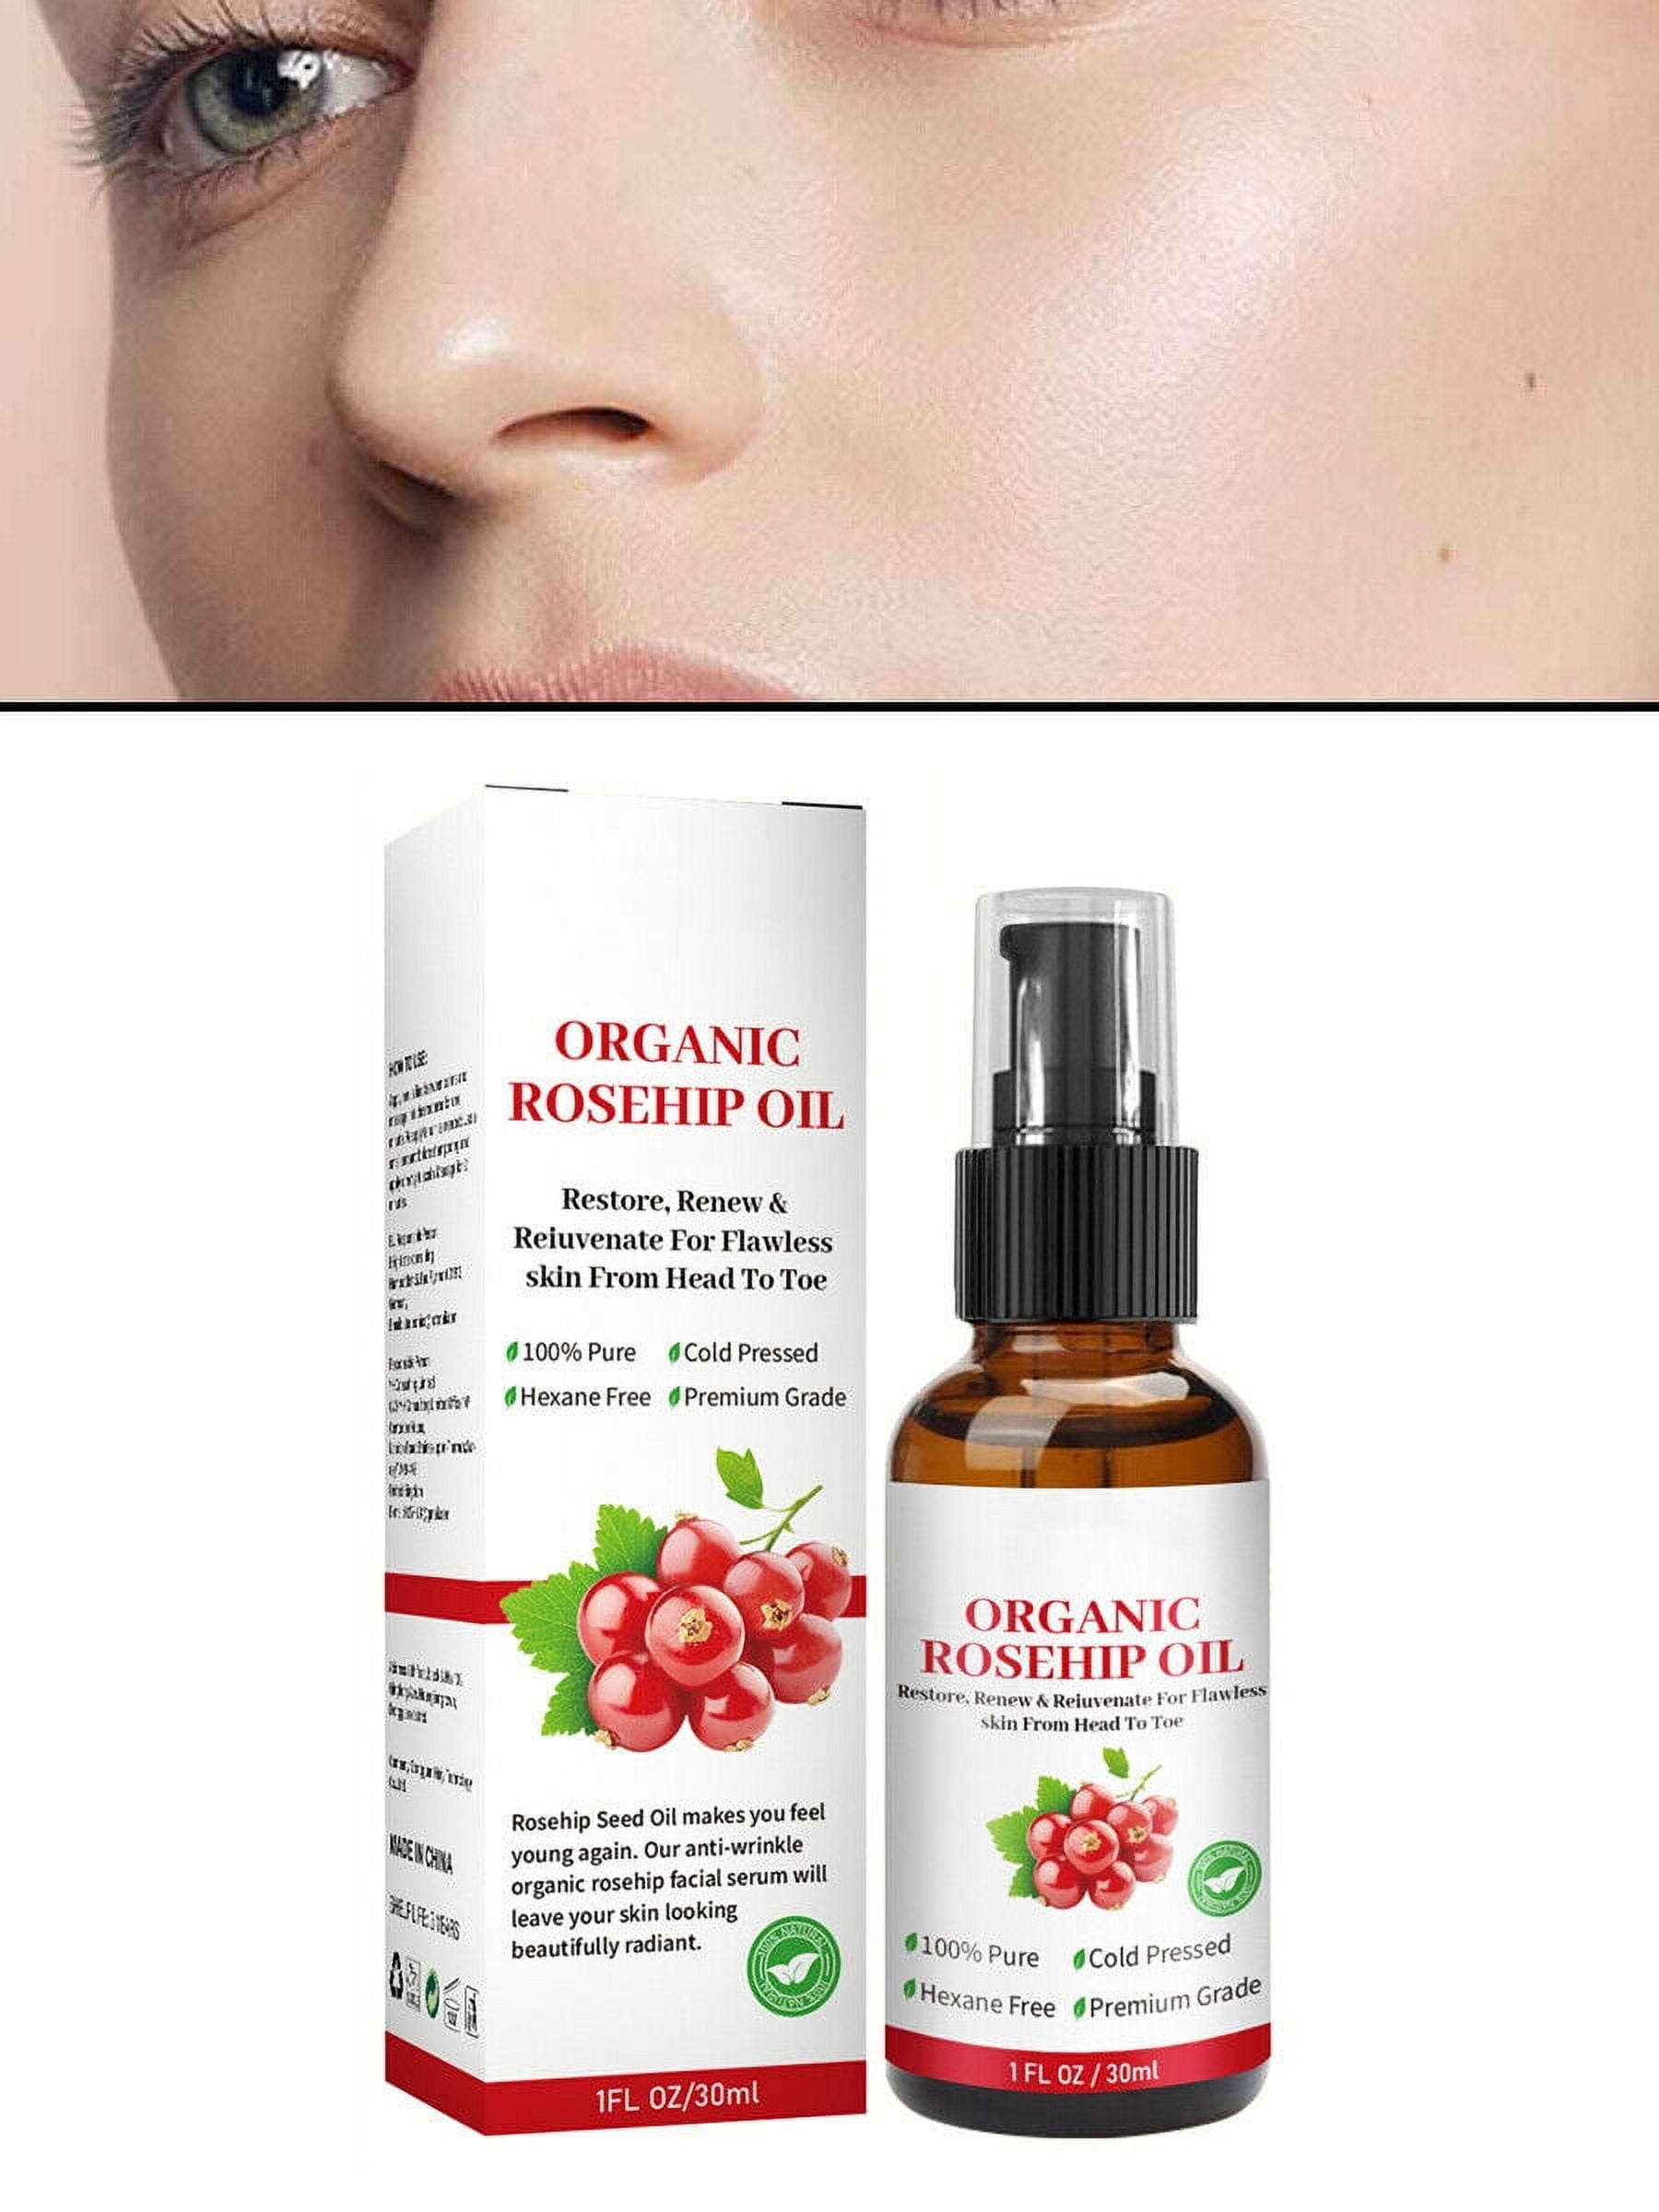 Herbal Spray Cleansing Lung, Herbal Lung Cleansing Spray, Onnature Organic  Herbal Lung Cleanse & Repair Nasal Spray Pro, Herbal Lung Cleanse Repair  Nasal Spray (4PCS) : : Belleza